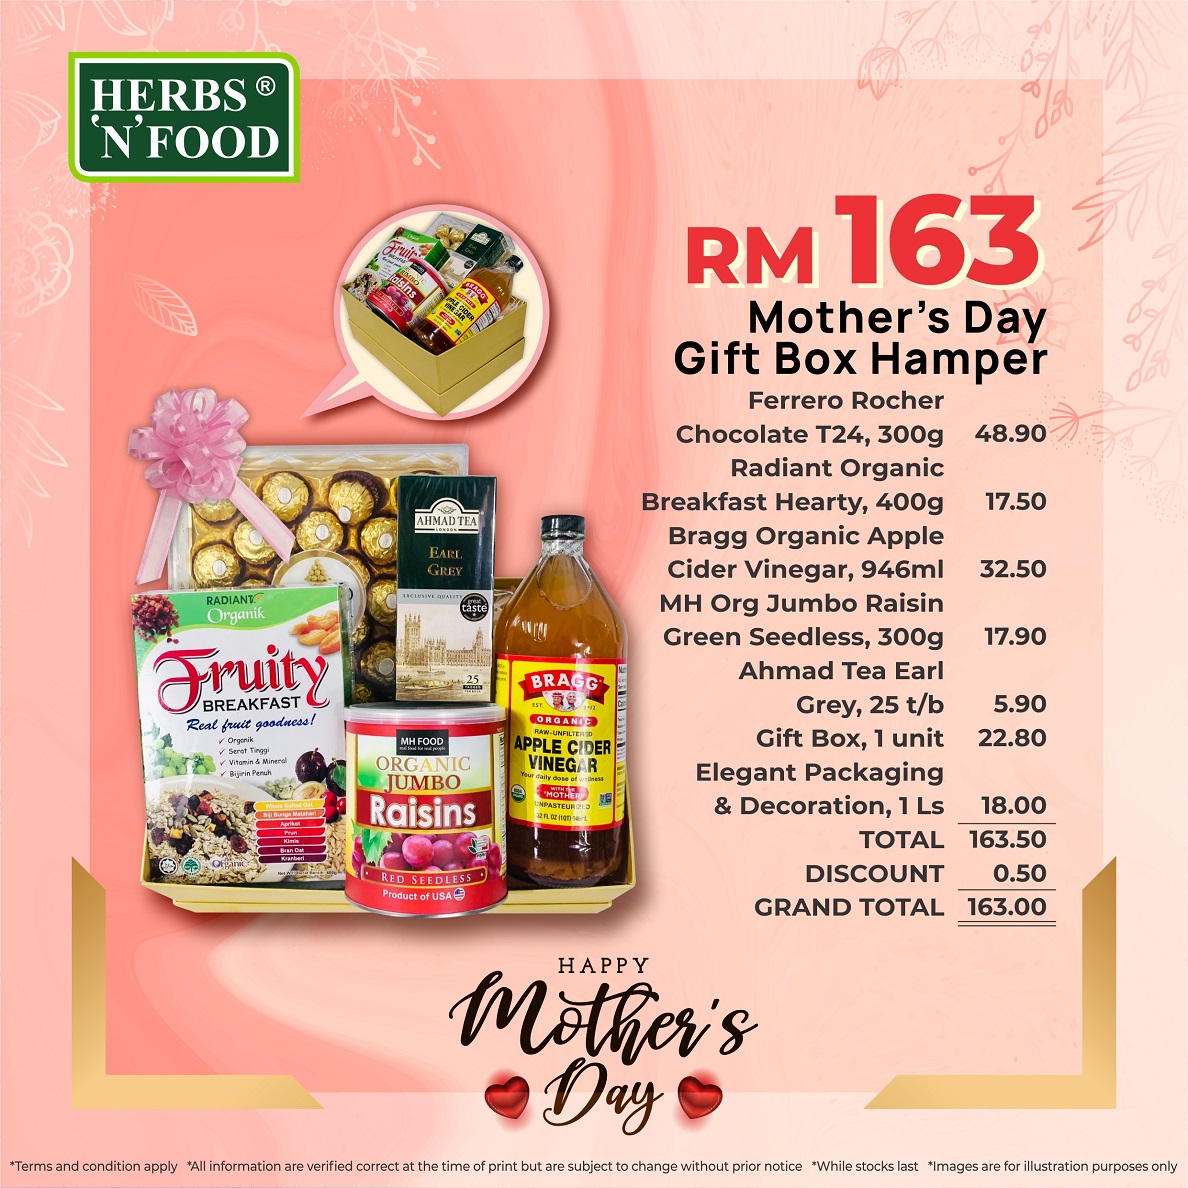 MOTHER’S DAY GIFT BOX HAMPER RM163